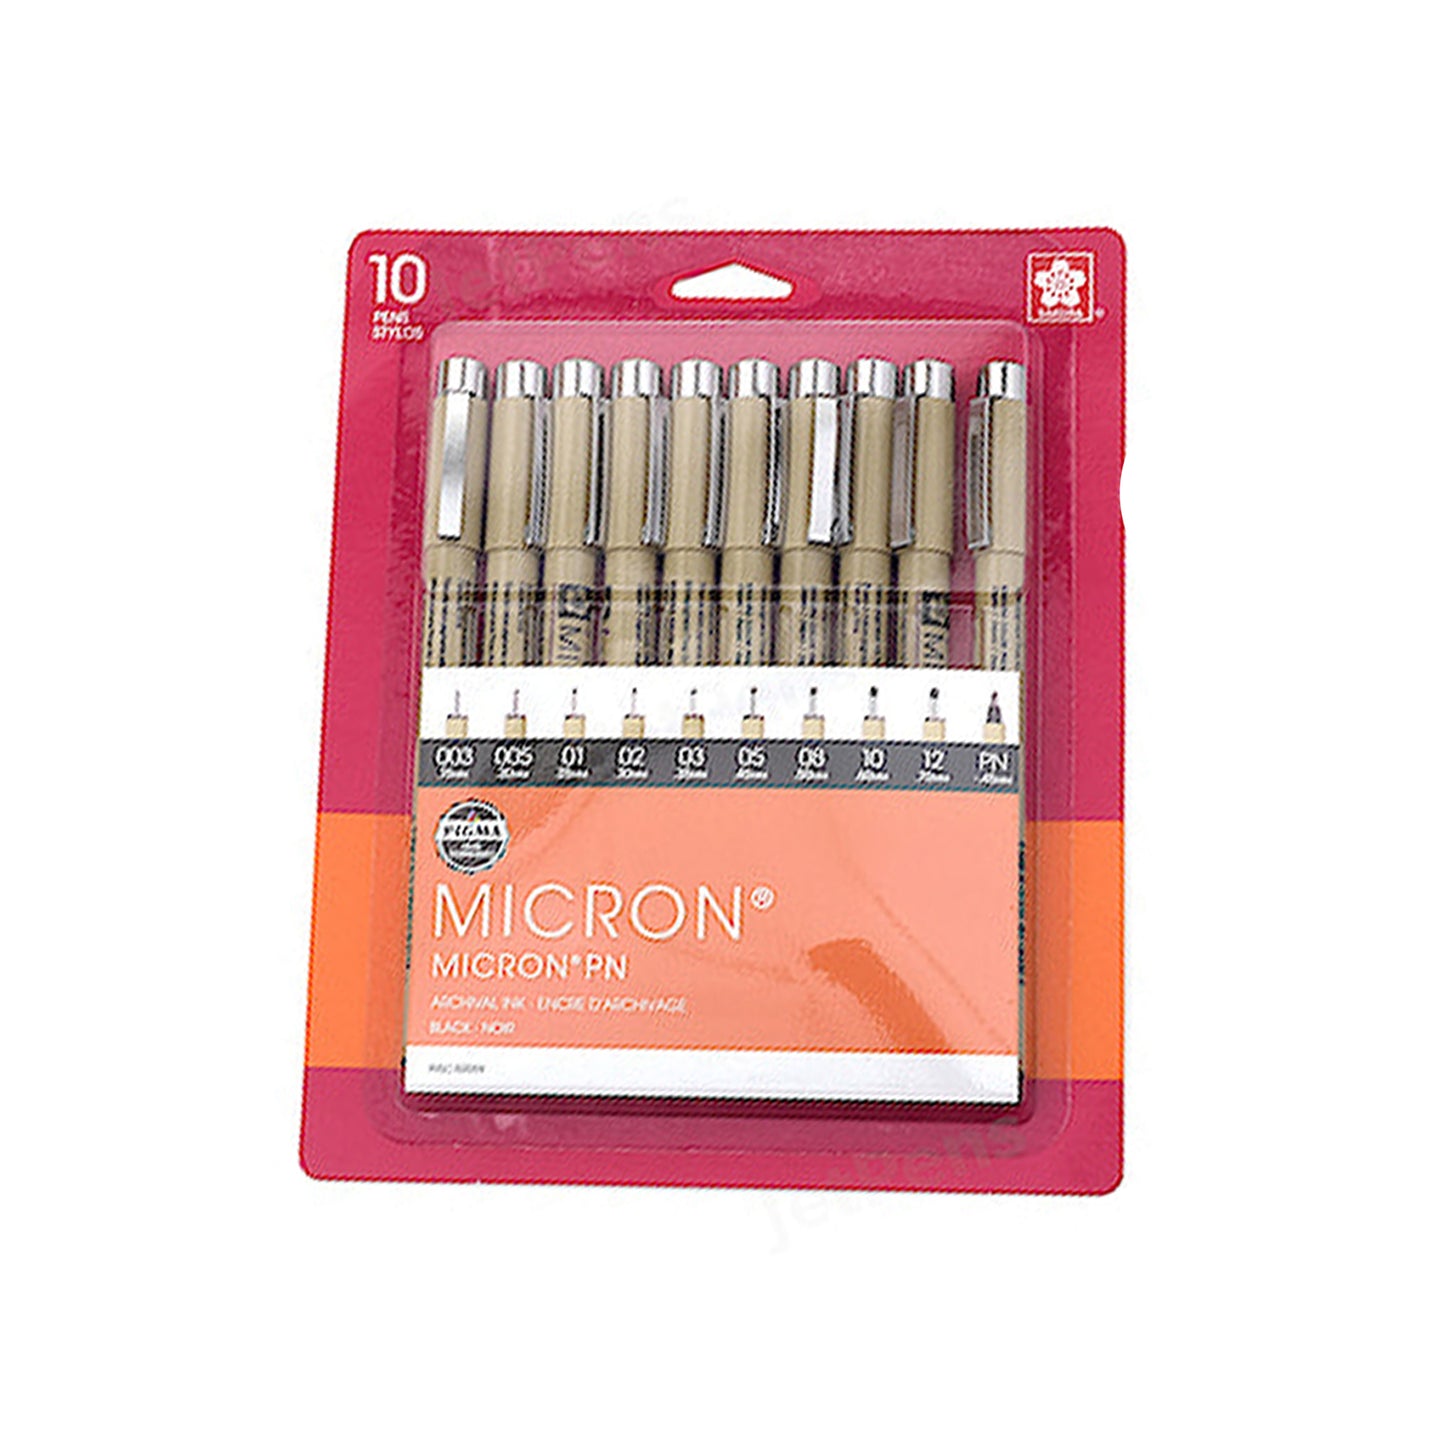 micron 10pk with a variety of sizes packaged and on white background